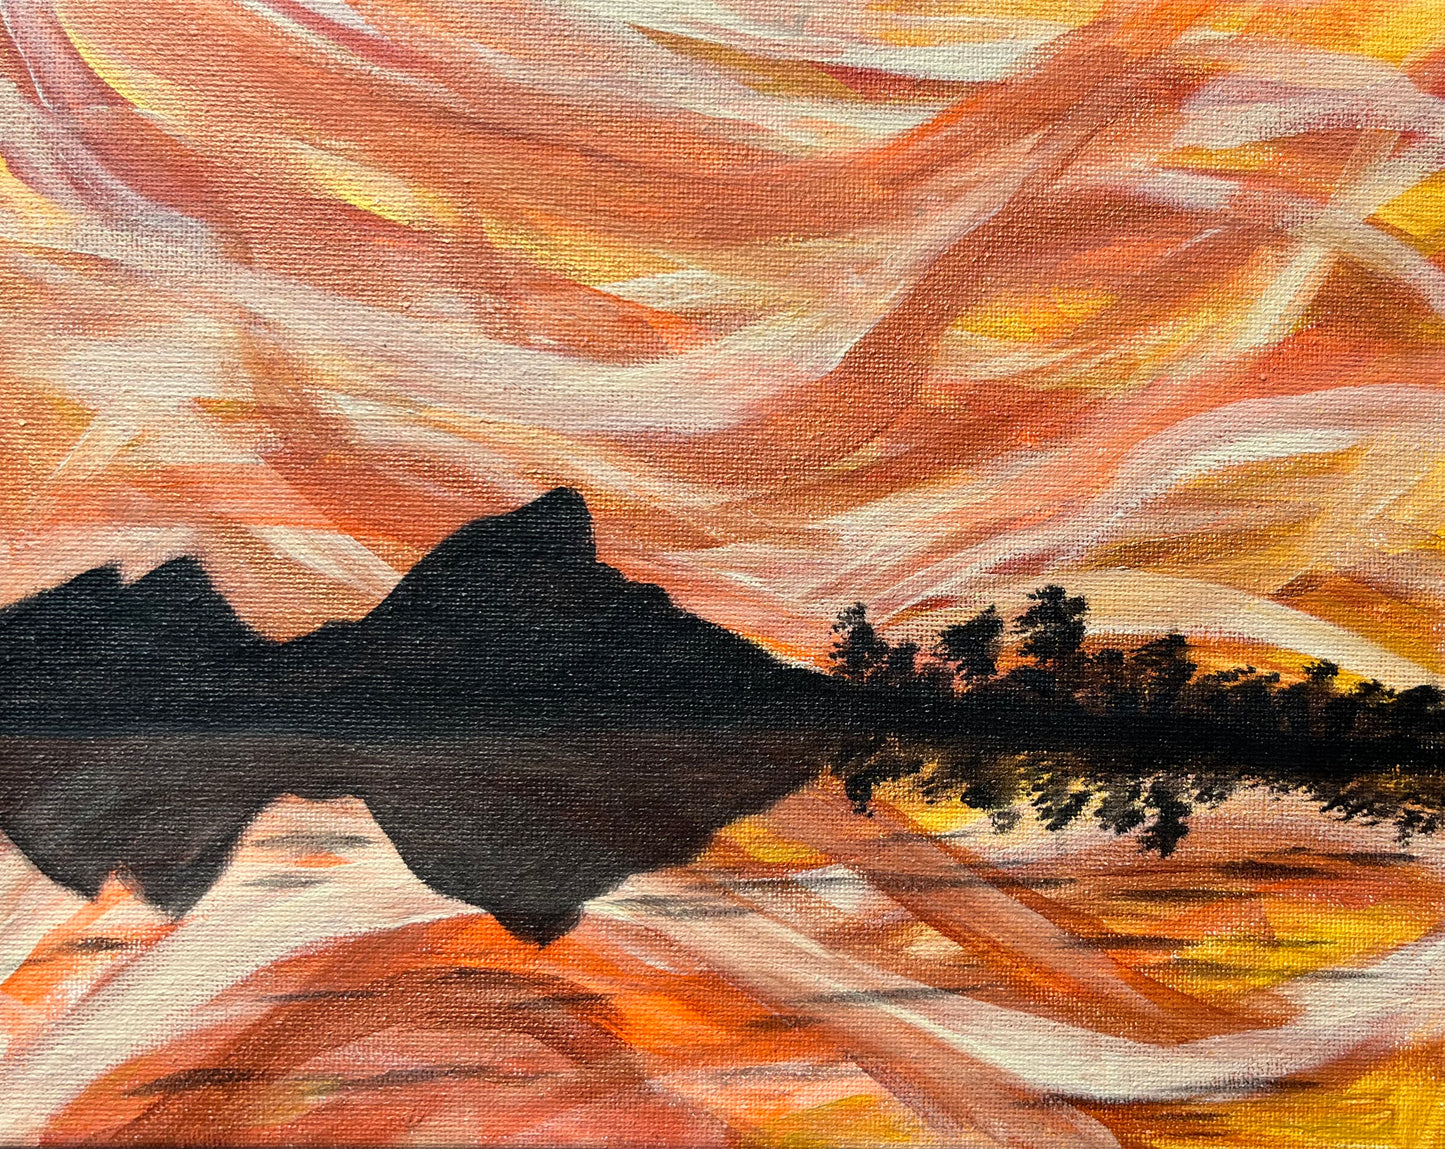 Original oil painting of mountains and trees with reflection in a colorful metallic sky